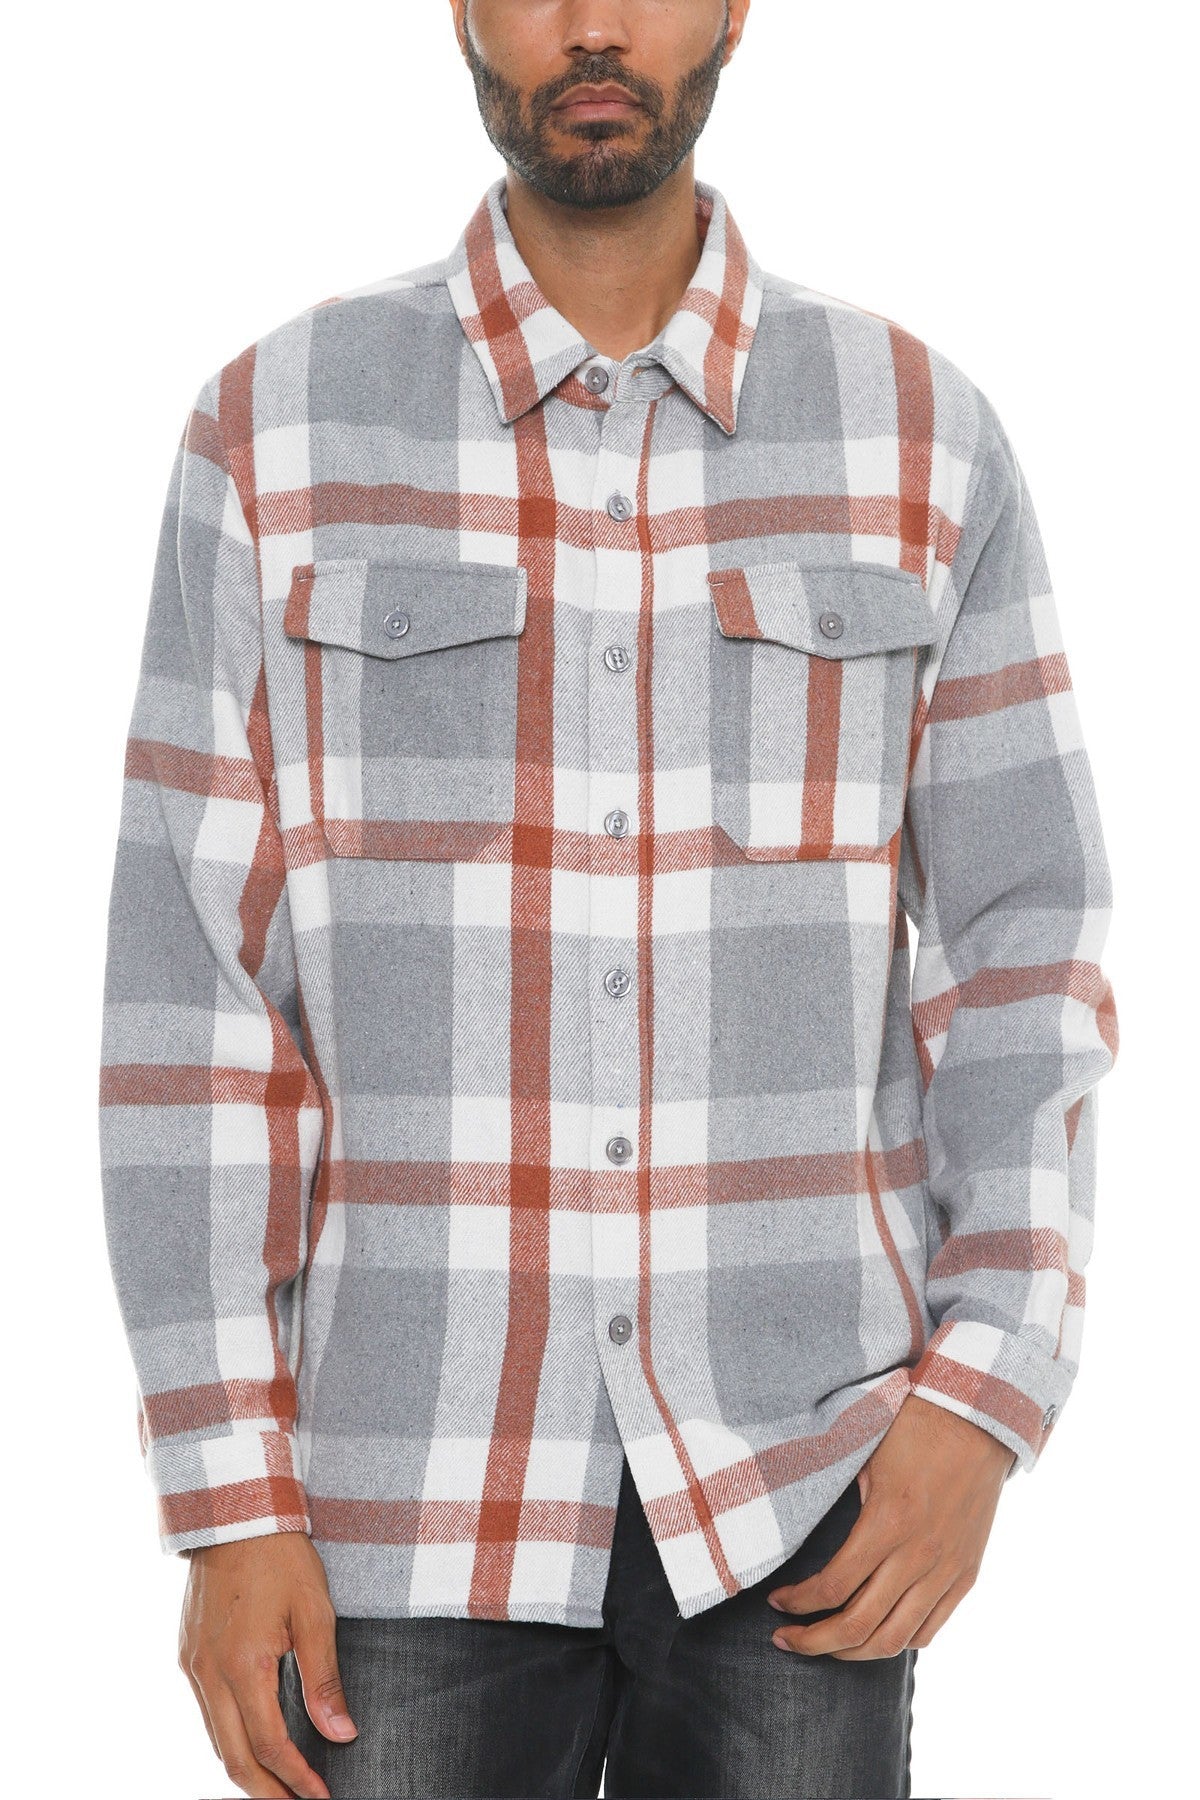 Grey/Rust Men's Checkered Soft Flannel Shacket - 8 colors - men's button-up shirt at TFC&H Co.